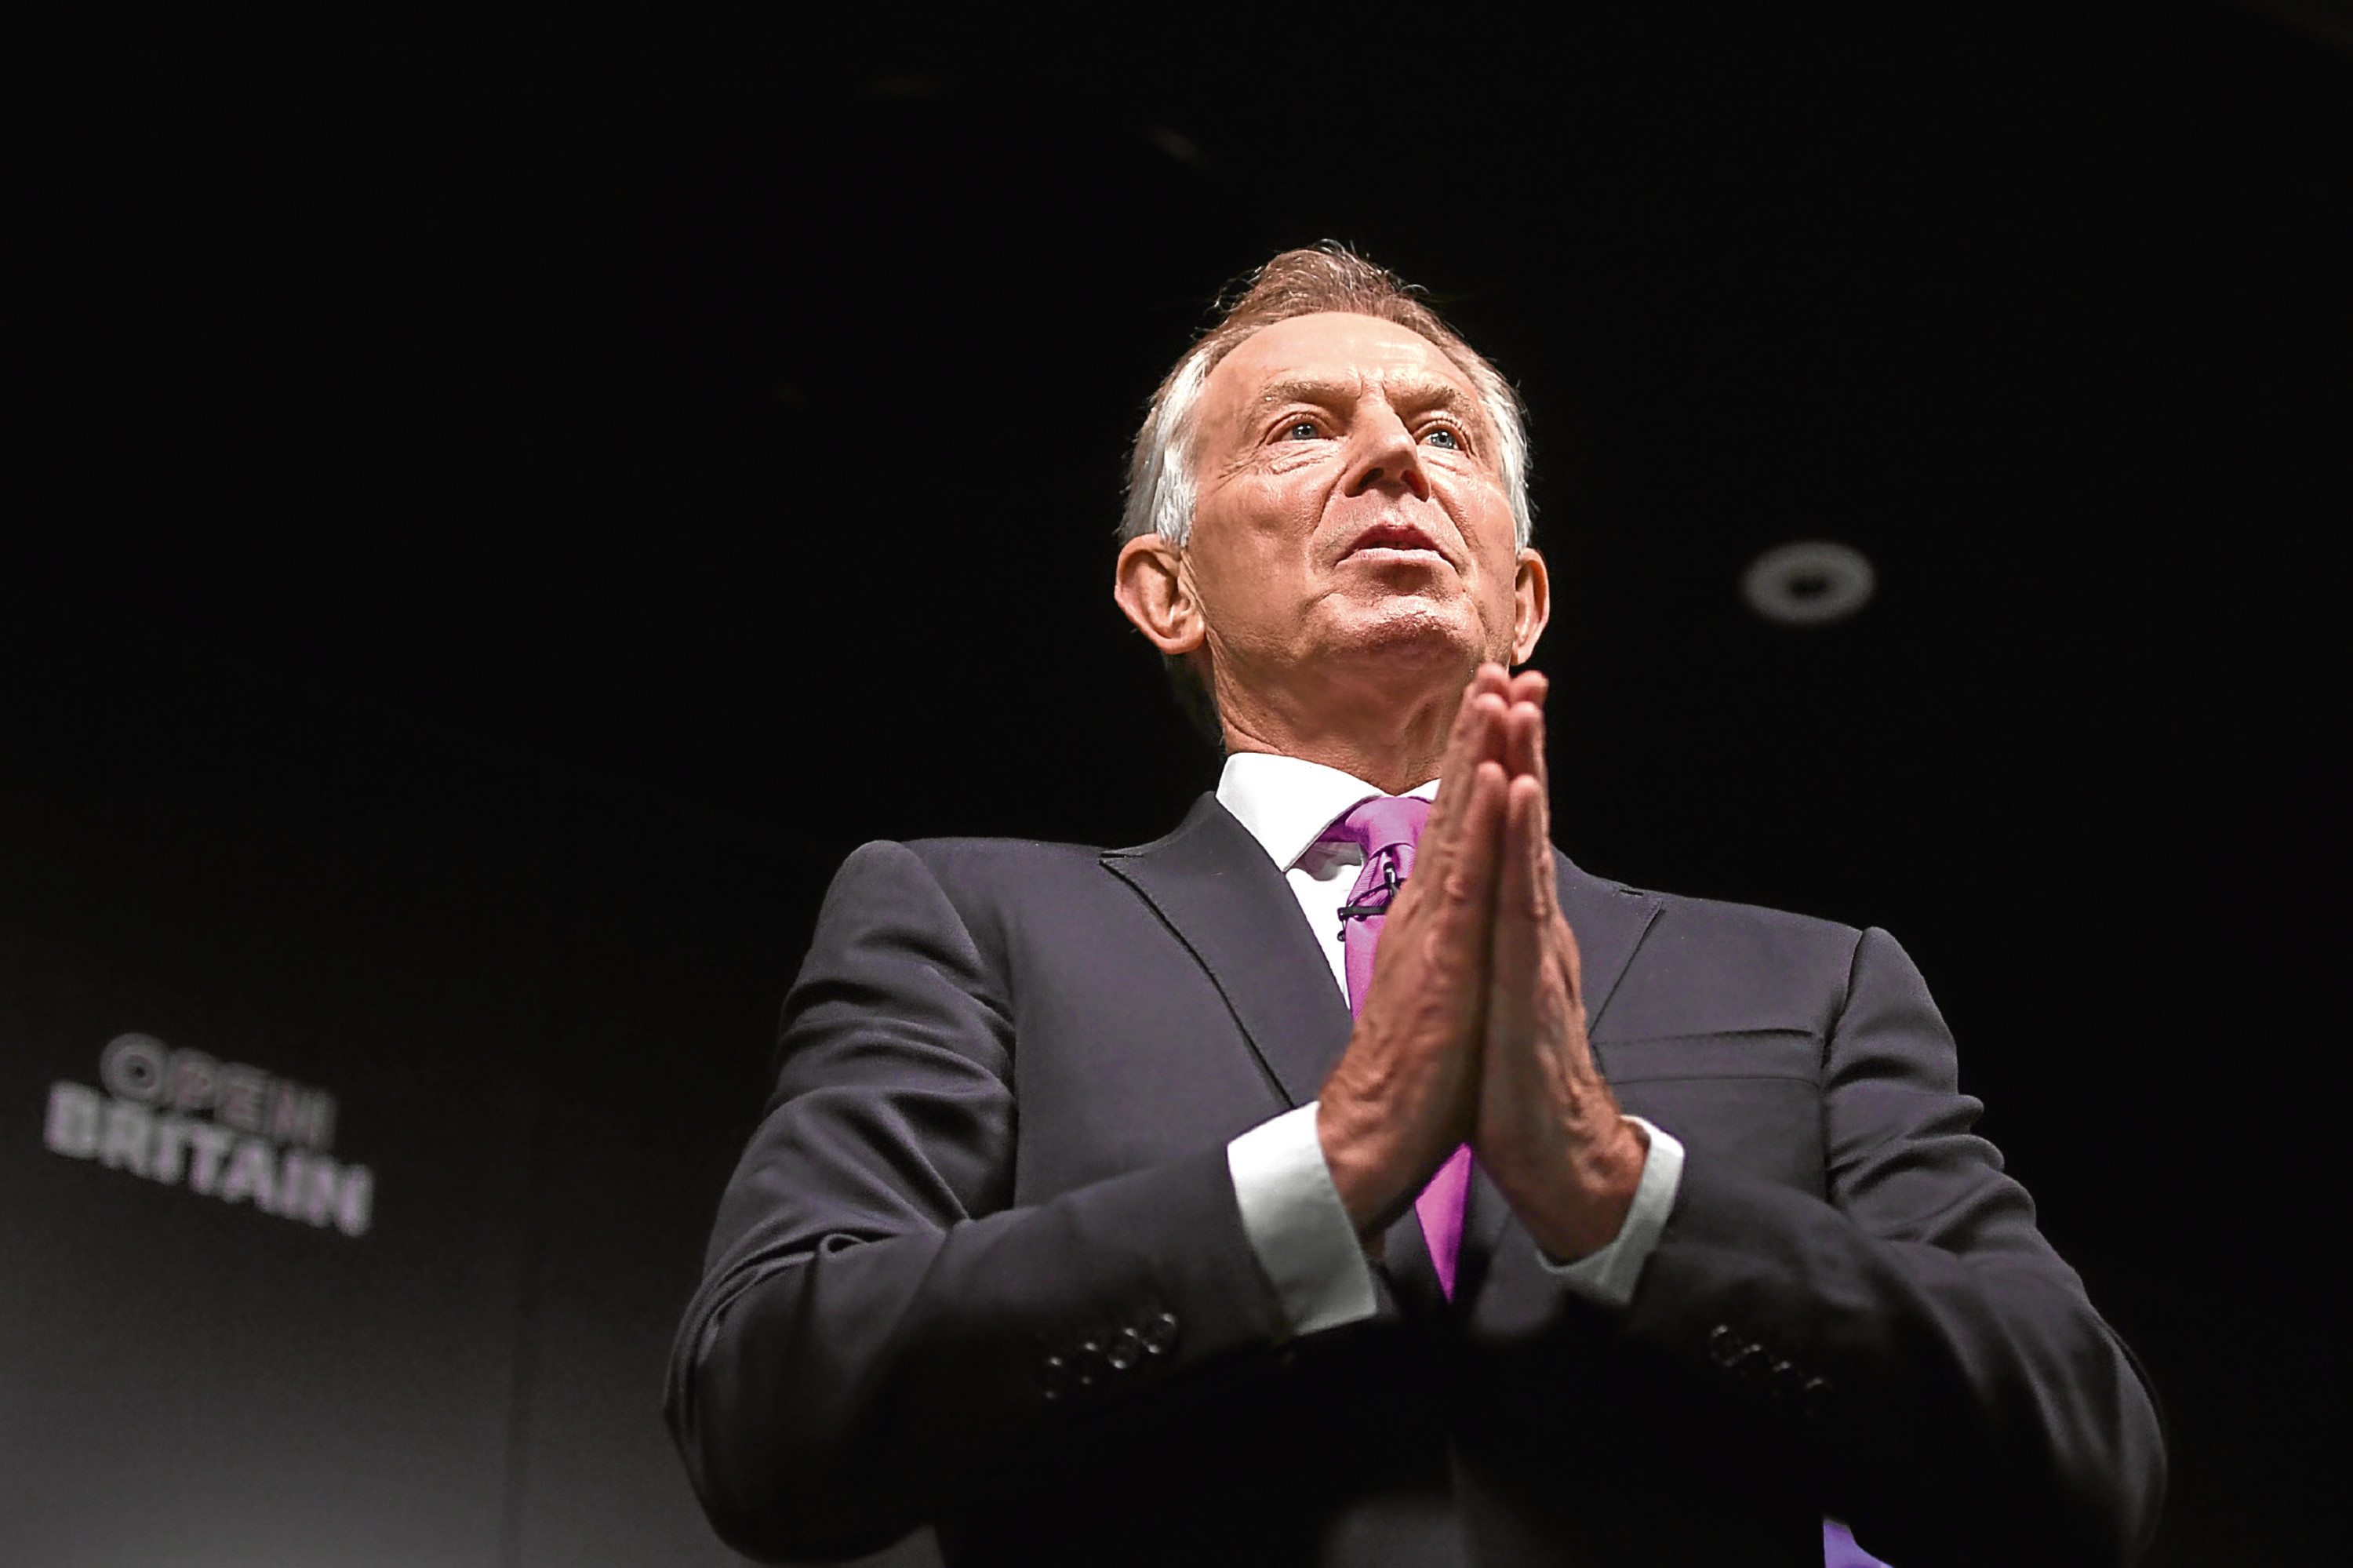 Former Prime Minister Tony Blair during his speech on Brexit.